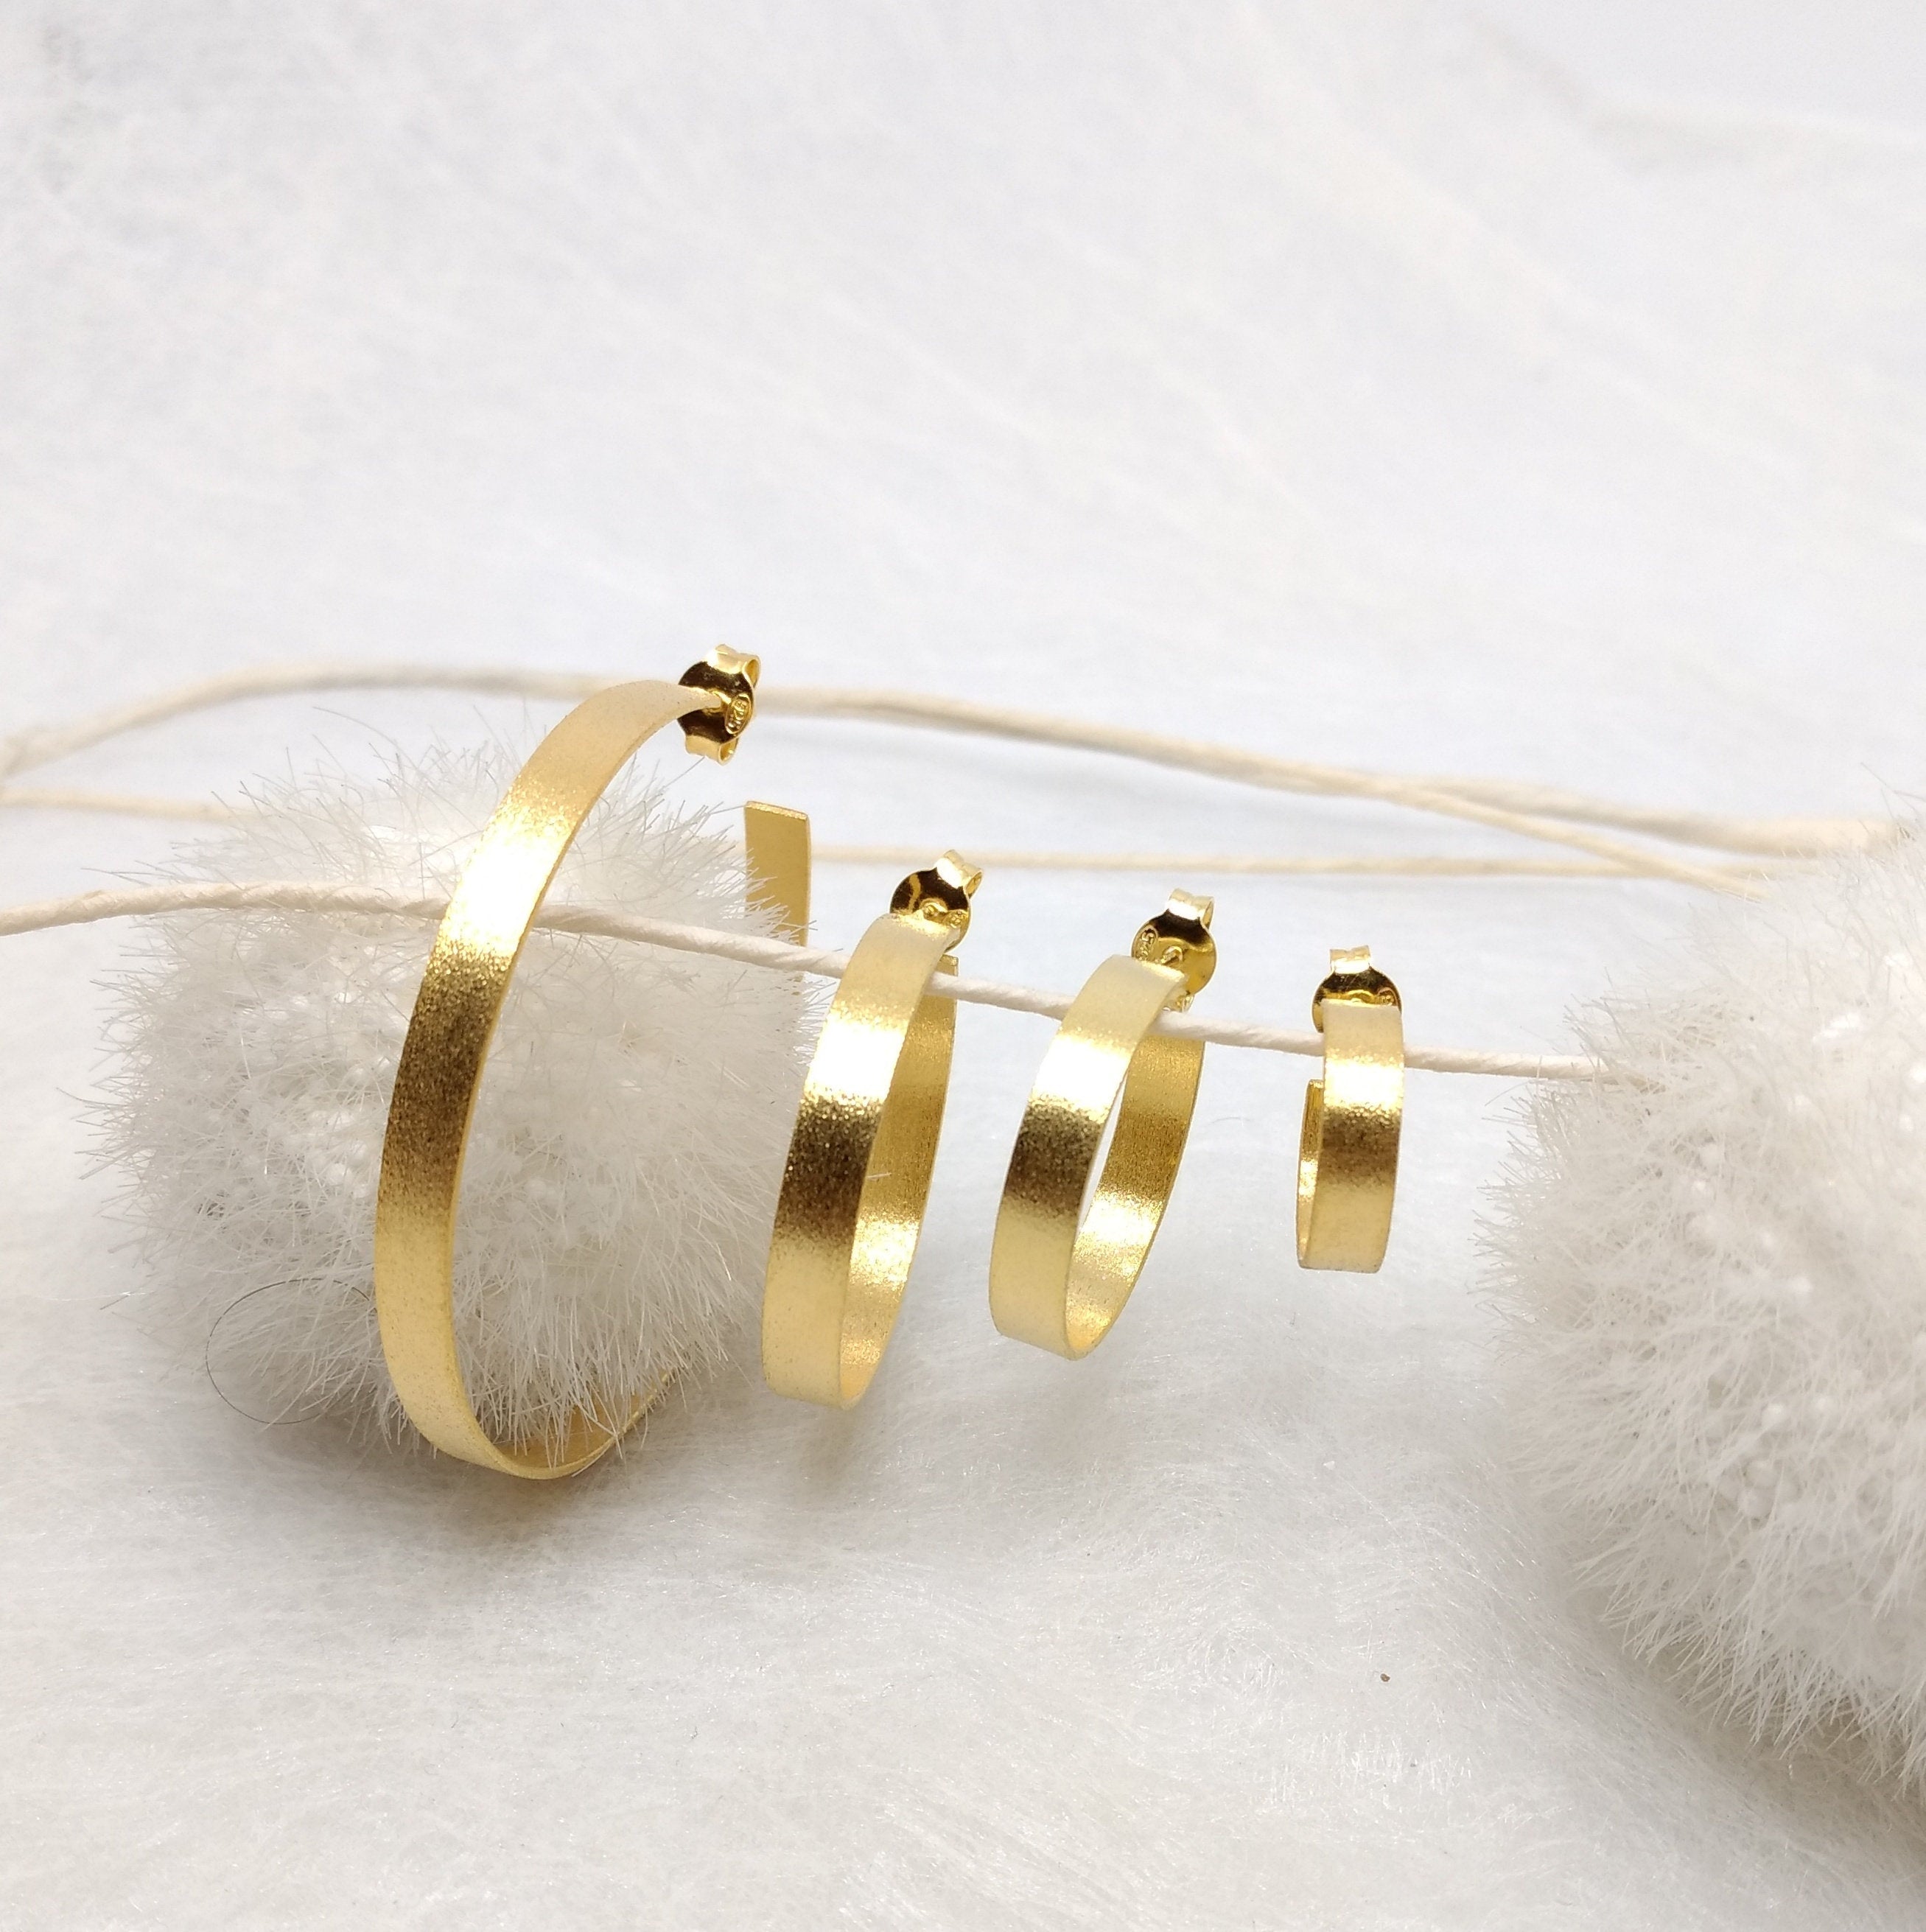 ImNos - big (ø 45 mm) Sterling Silver hoops, rhodium or gold plated